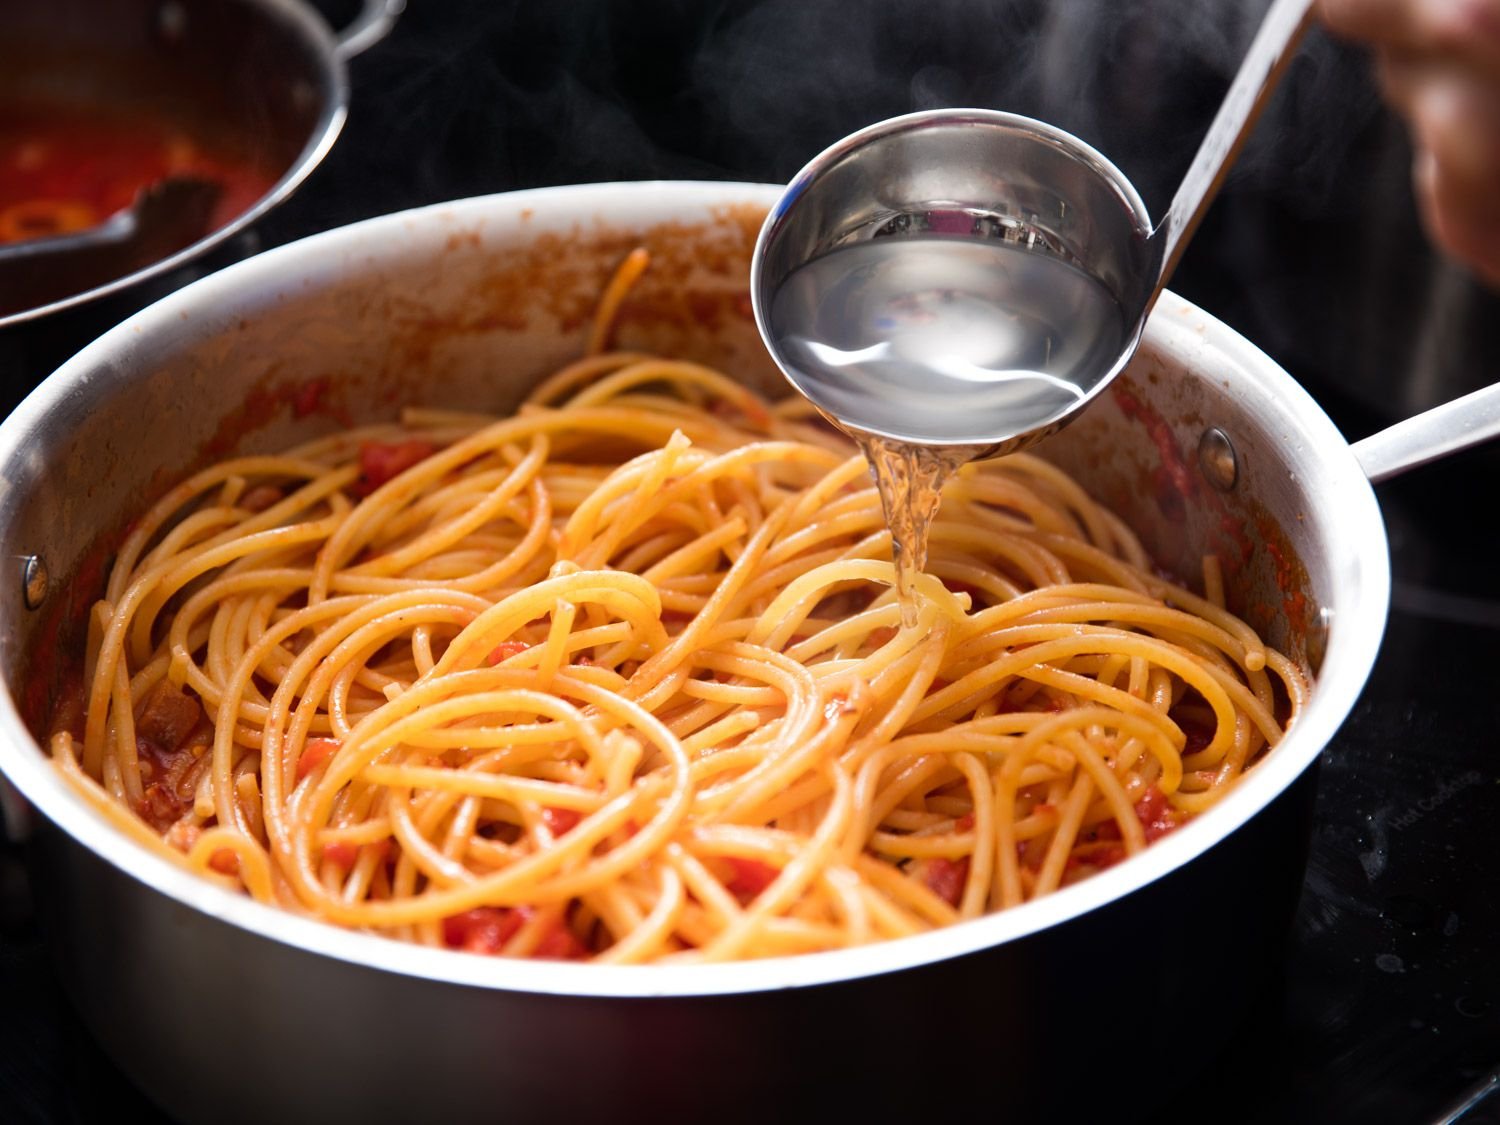 Does Adding Pasta Water Really Make a Difference?